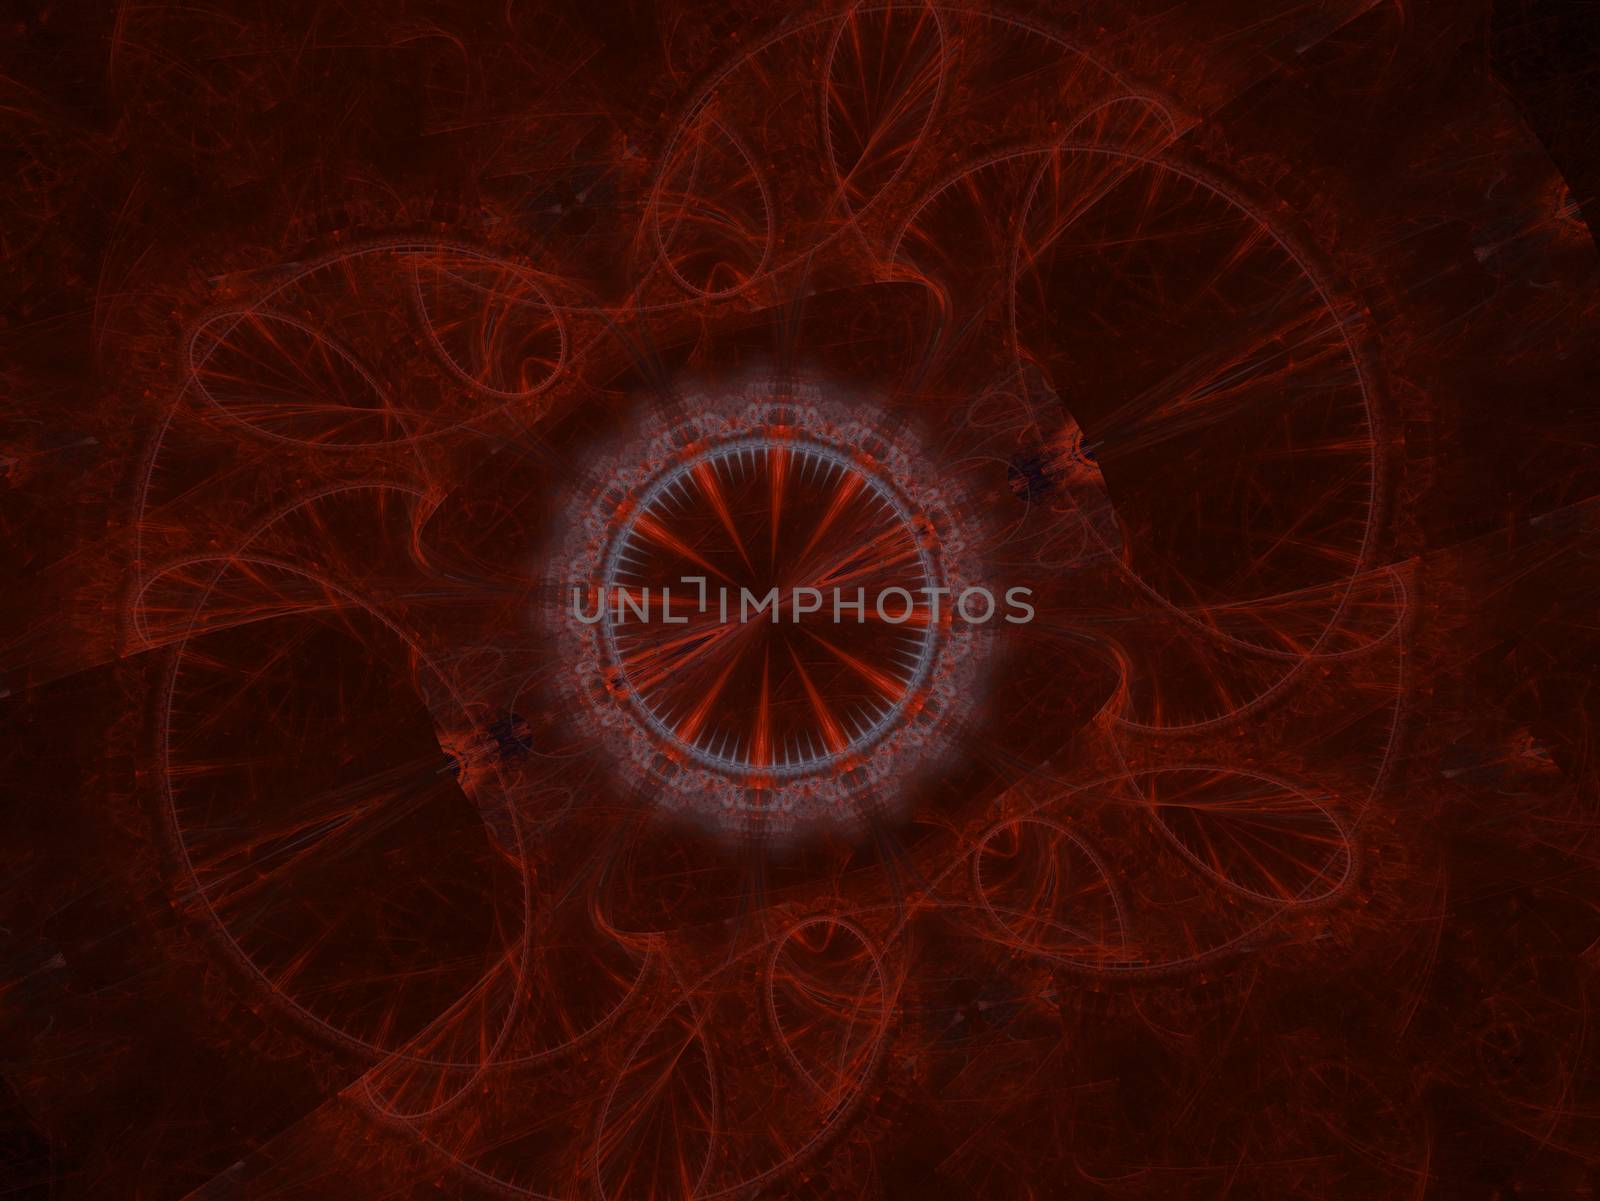 Cosmic geometry. Light phenomena in space. Flash and lightning in the languid air. Abstract fractal mandala illustration. The underlying processes in other galaxies.